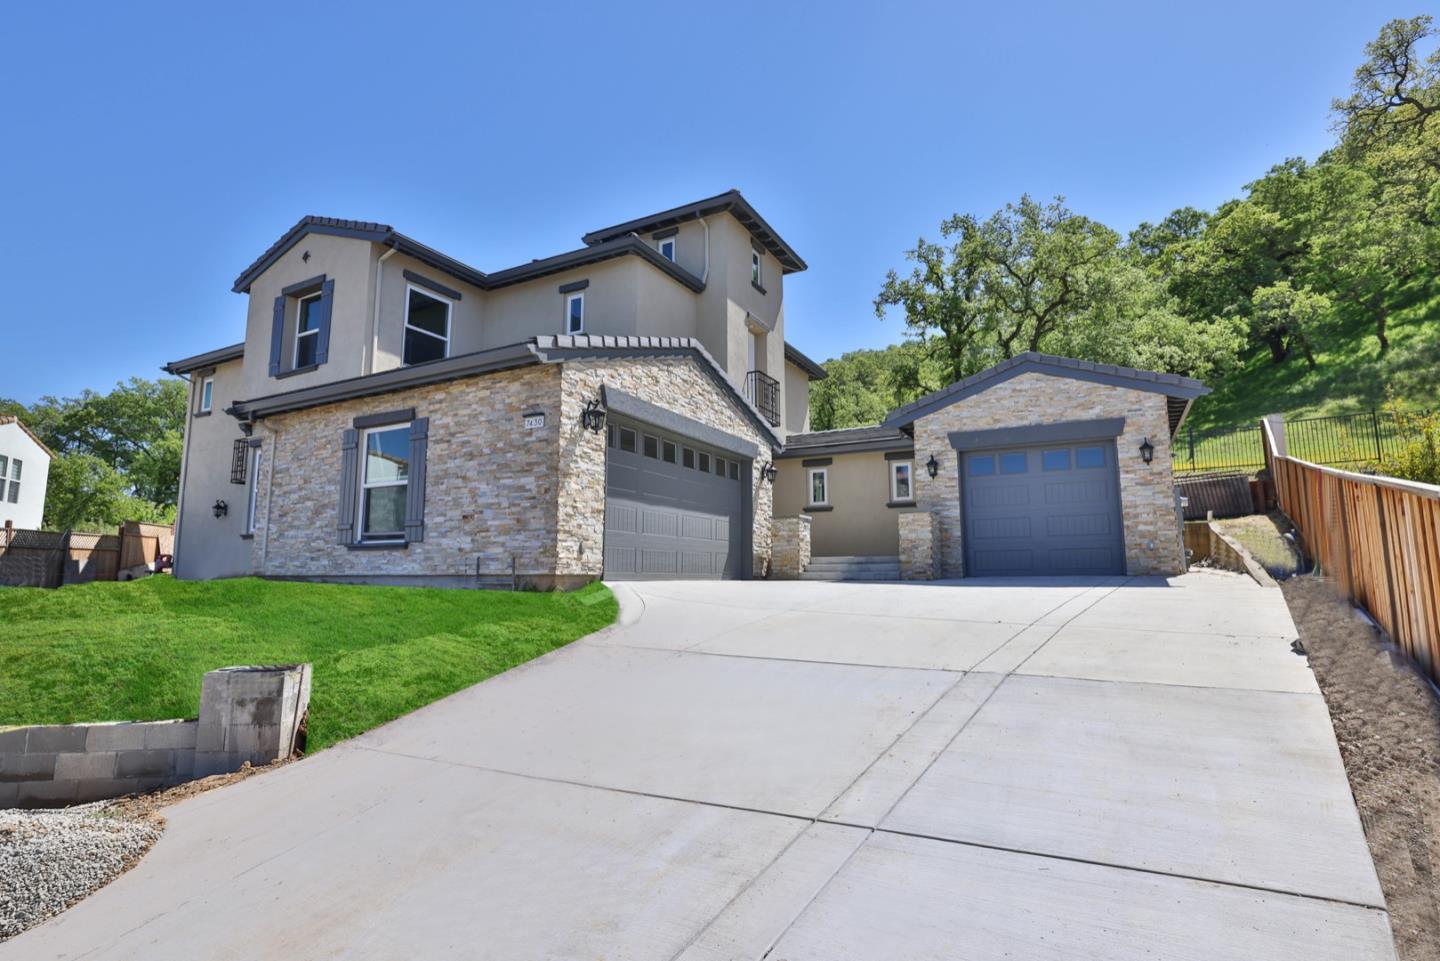 Photo of 7430 Sunningdale Wy in Gilroy, CA